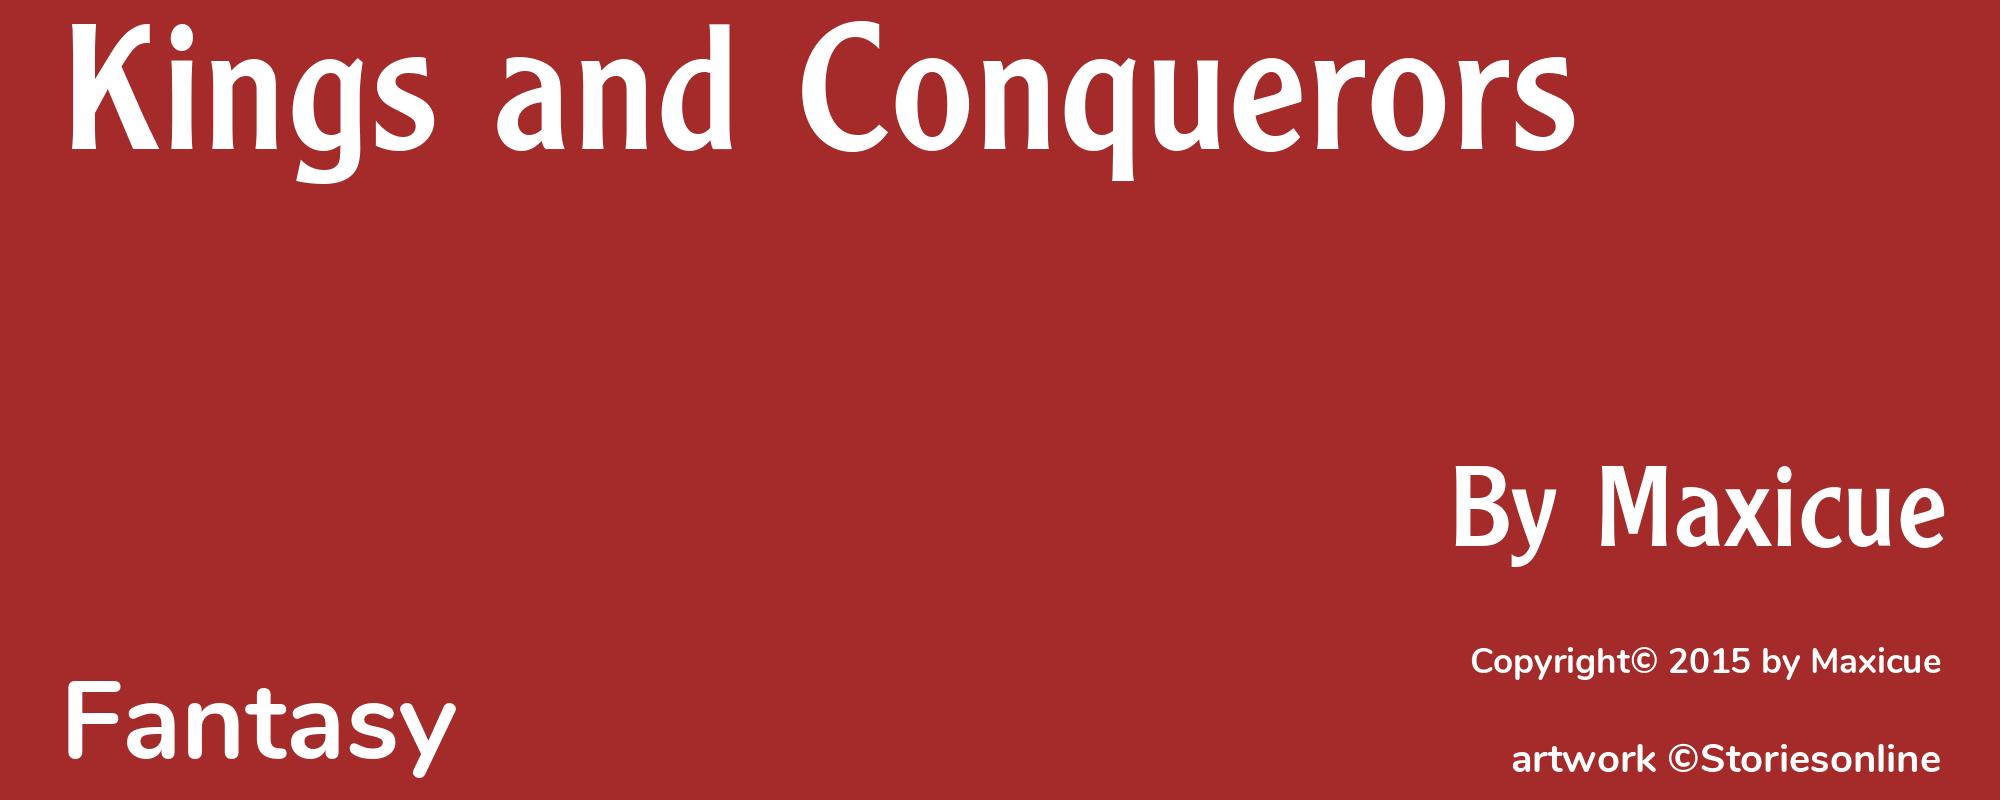 Kings and Conquerors - Cover